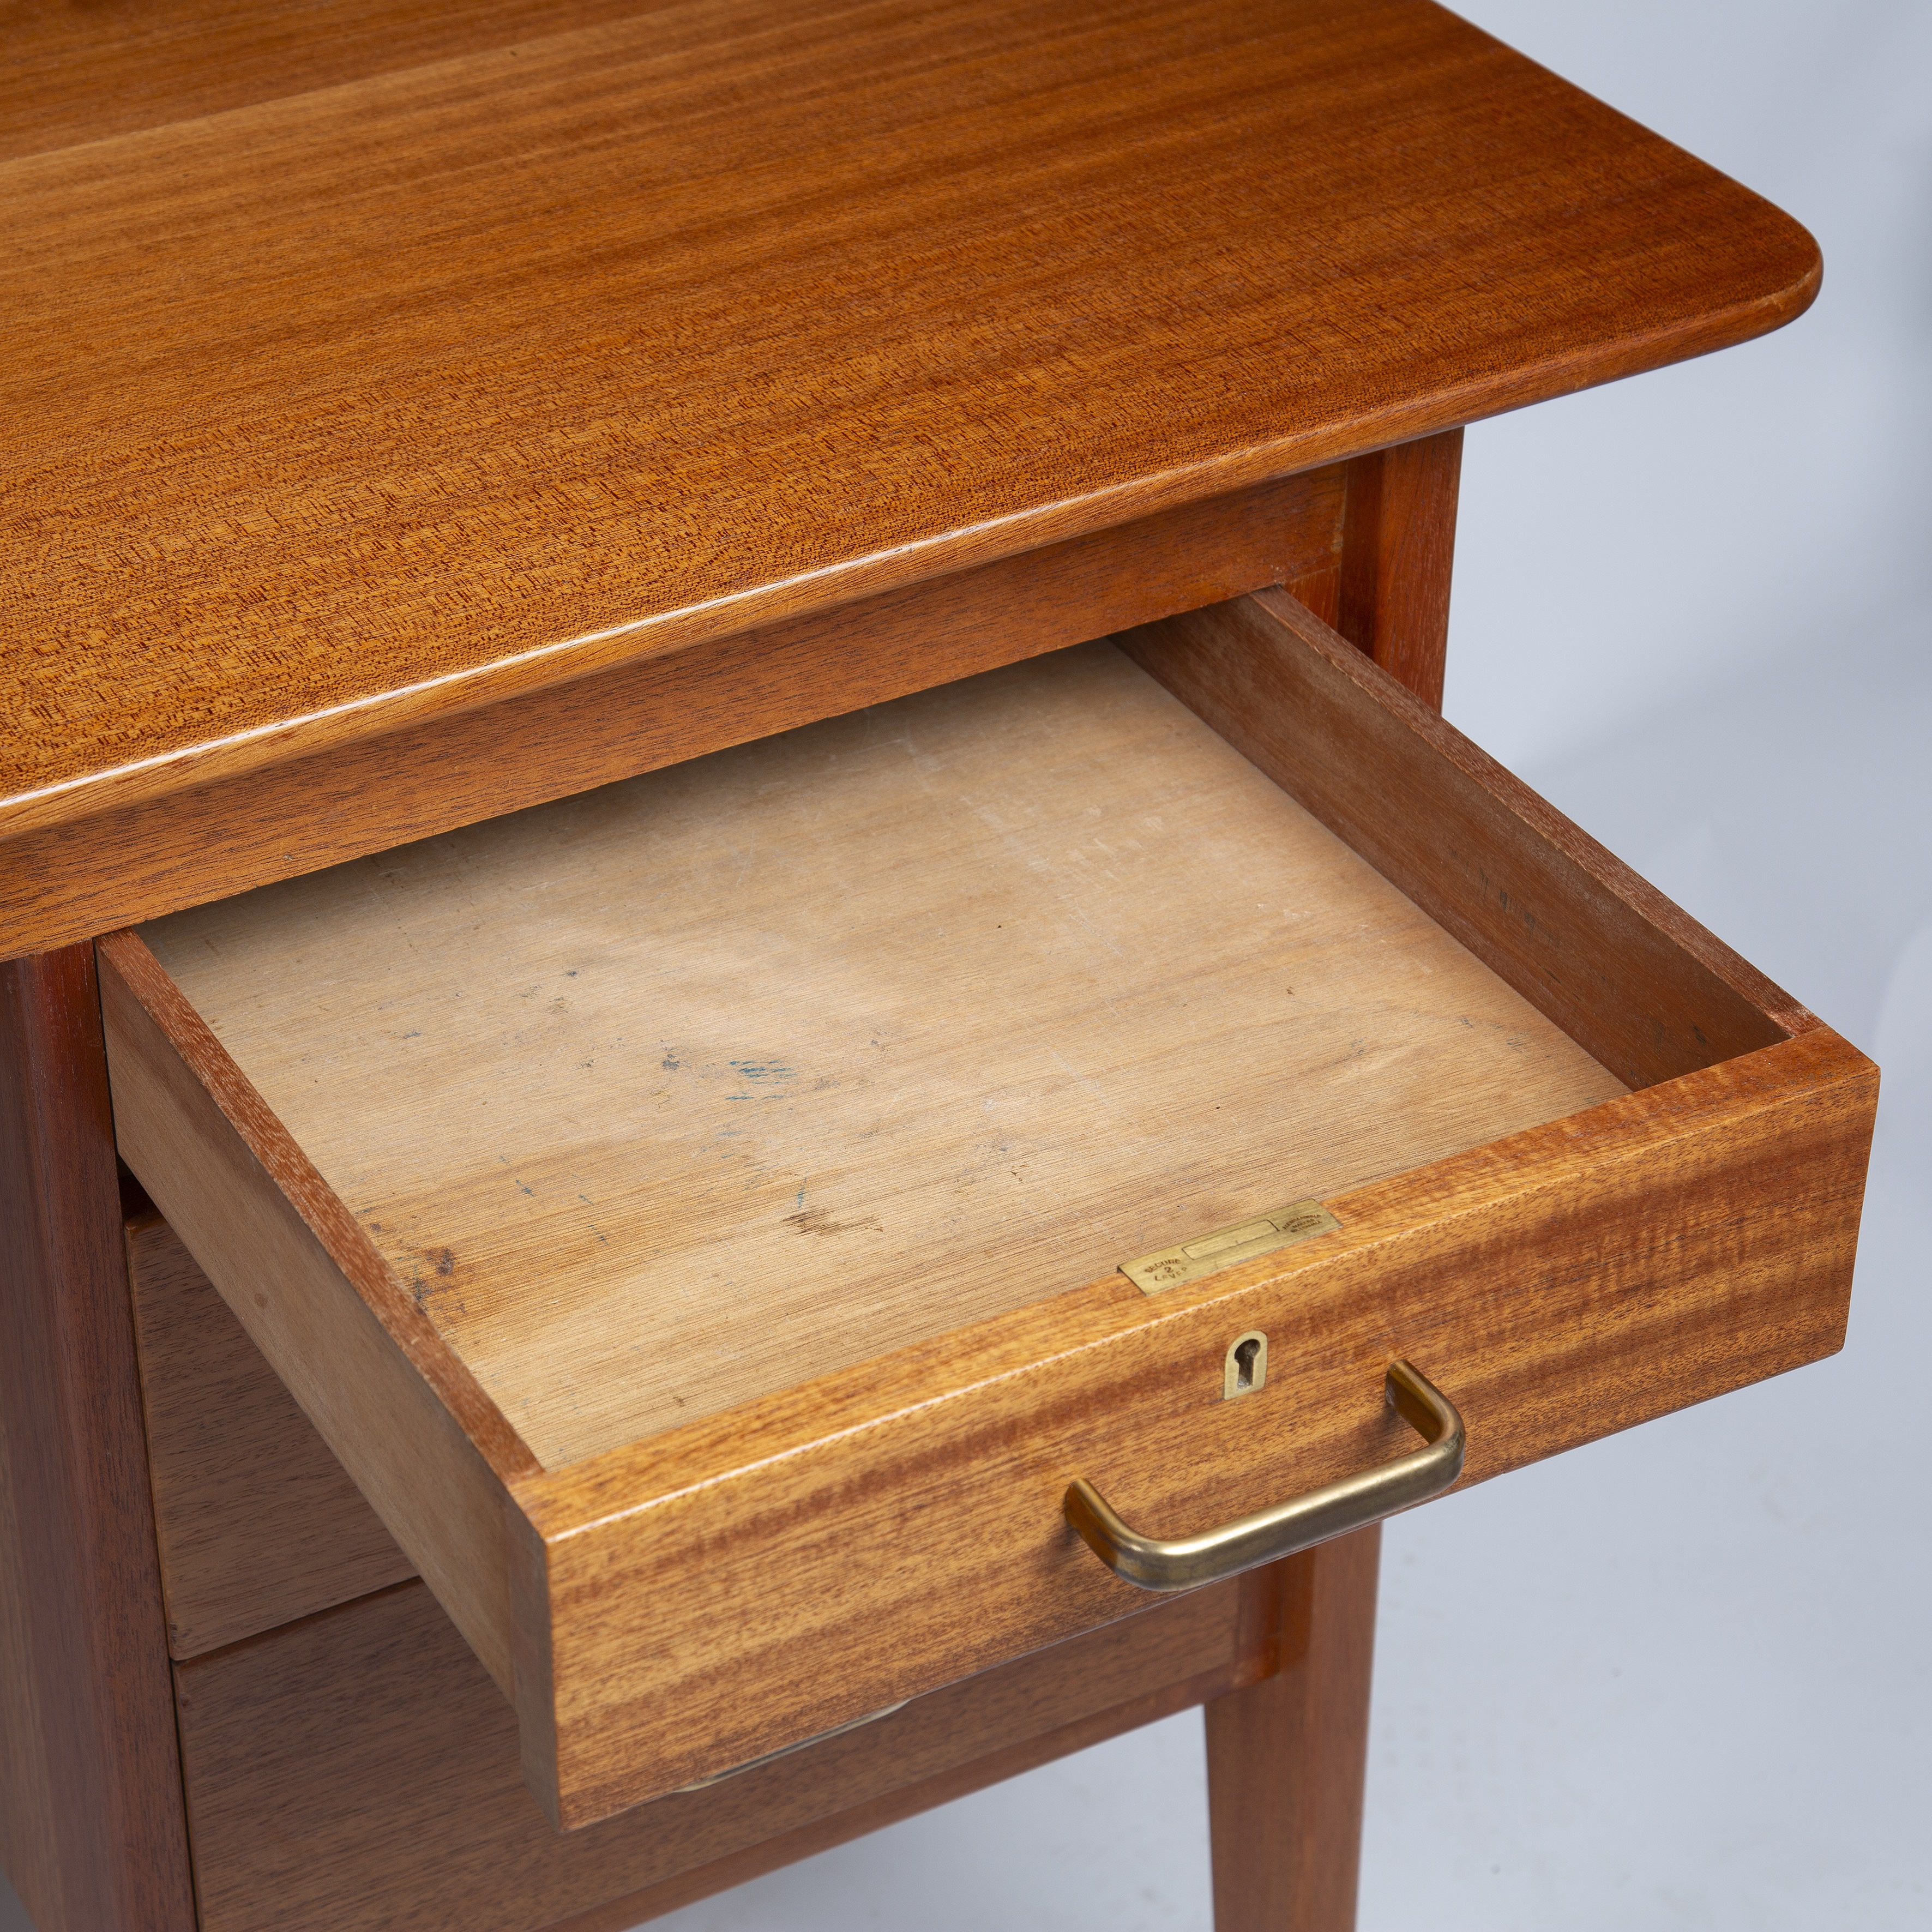 Gordon Russell desk 76cm high, 152cm wide. Stains to upper internal drawers. Key present. Stable and - Image 3 of 10